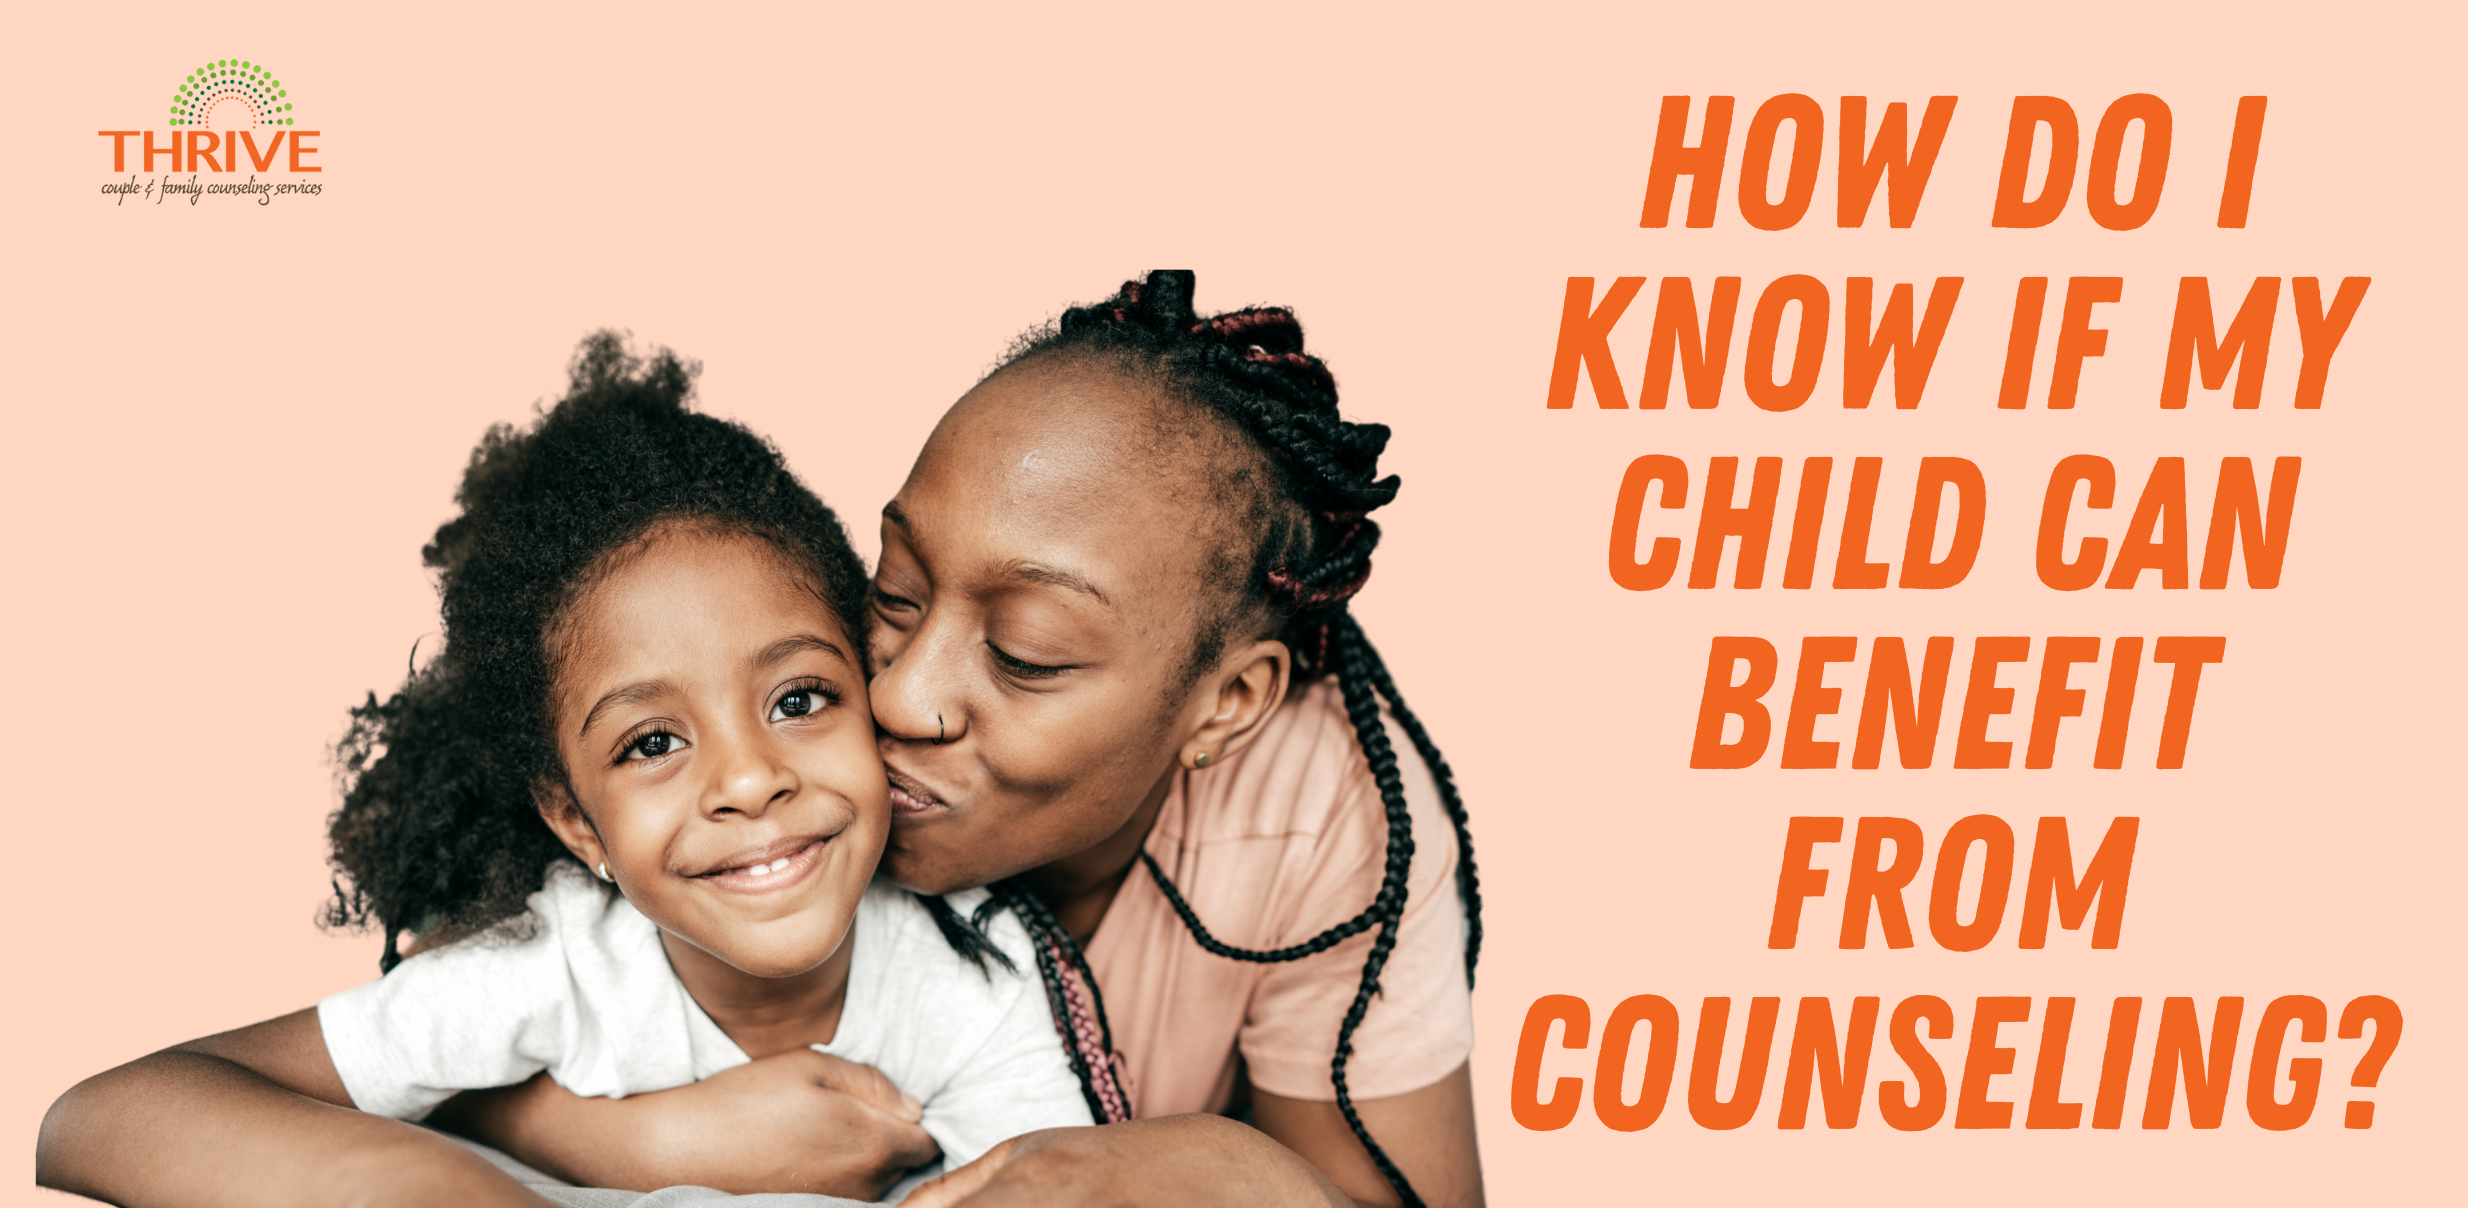 A graphic that reads "How do I know if my child can benefit from counseling?" in dark orange text on a light orange background, to the right of a stock photo of a Black mom and child. The mom is kissing the child, who is smiling, on the cheek.